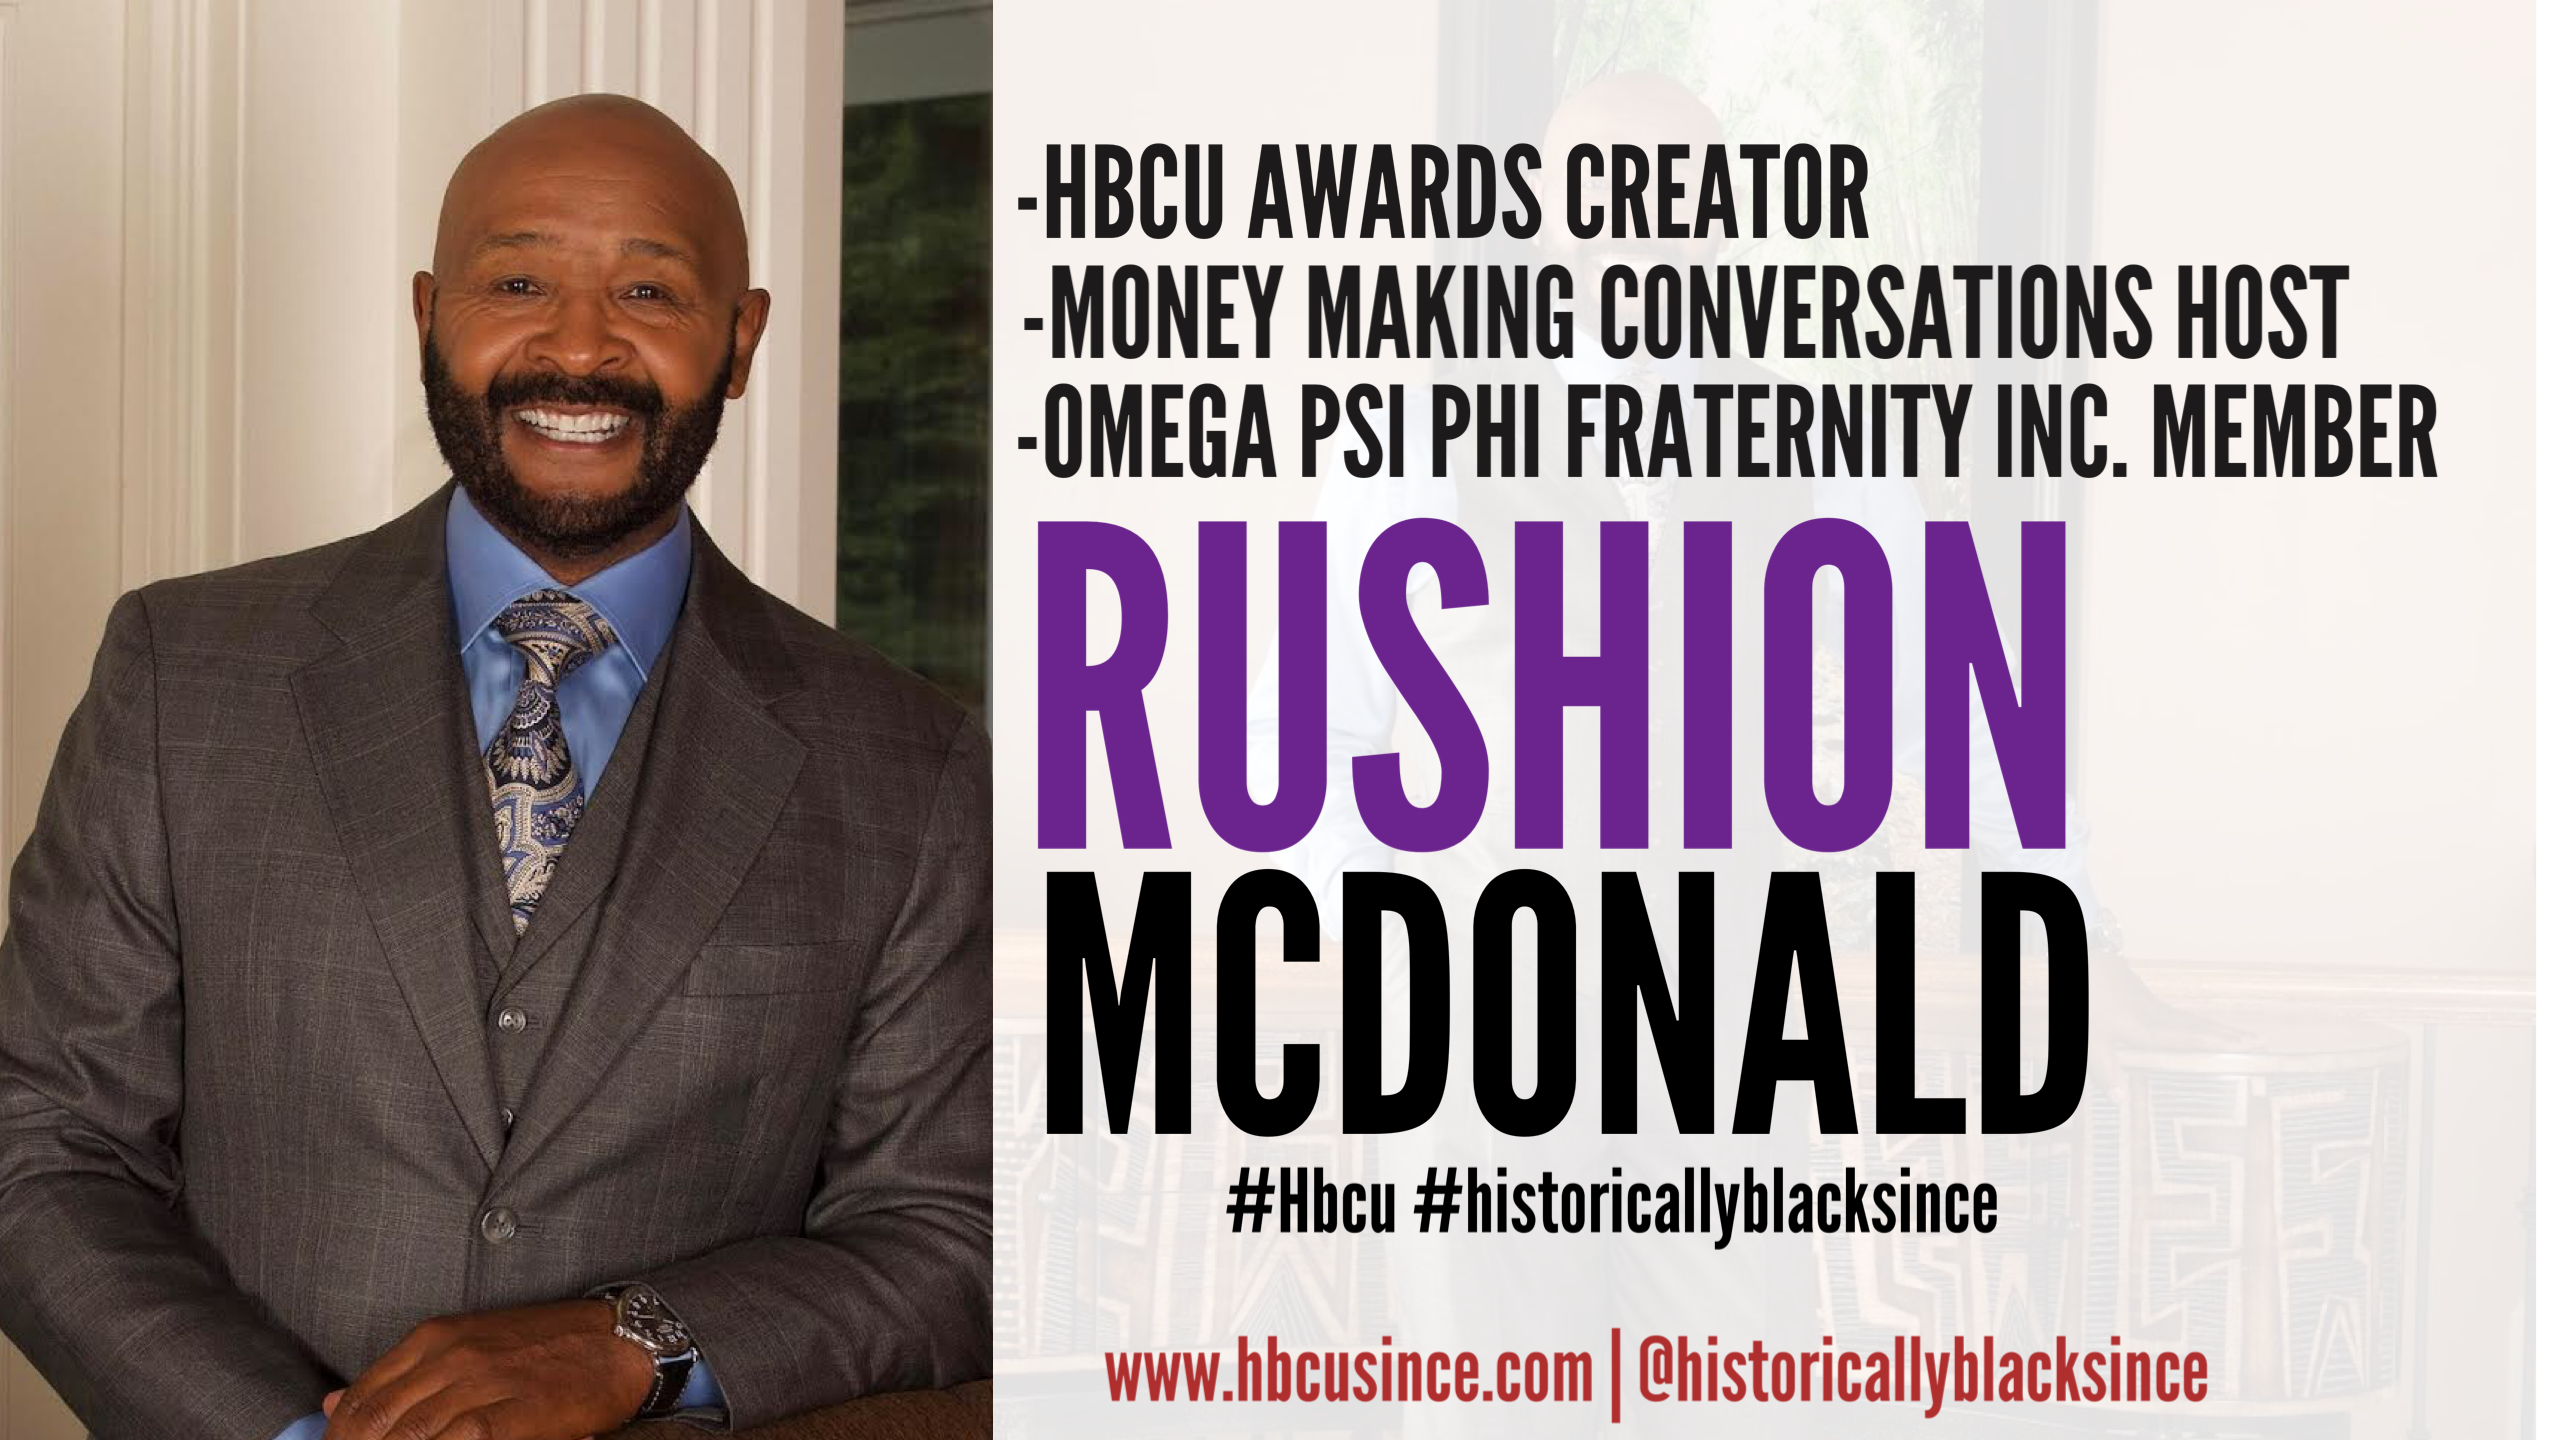 Award Winning Producer Rushion McDonald Speaks on How Joining Omega Psi Phi Fraternity Gave His Life Direction, Starting the HBCU Awards, and New Talk Show